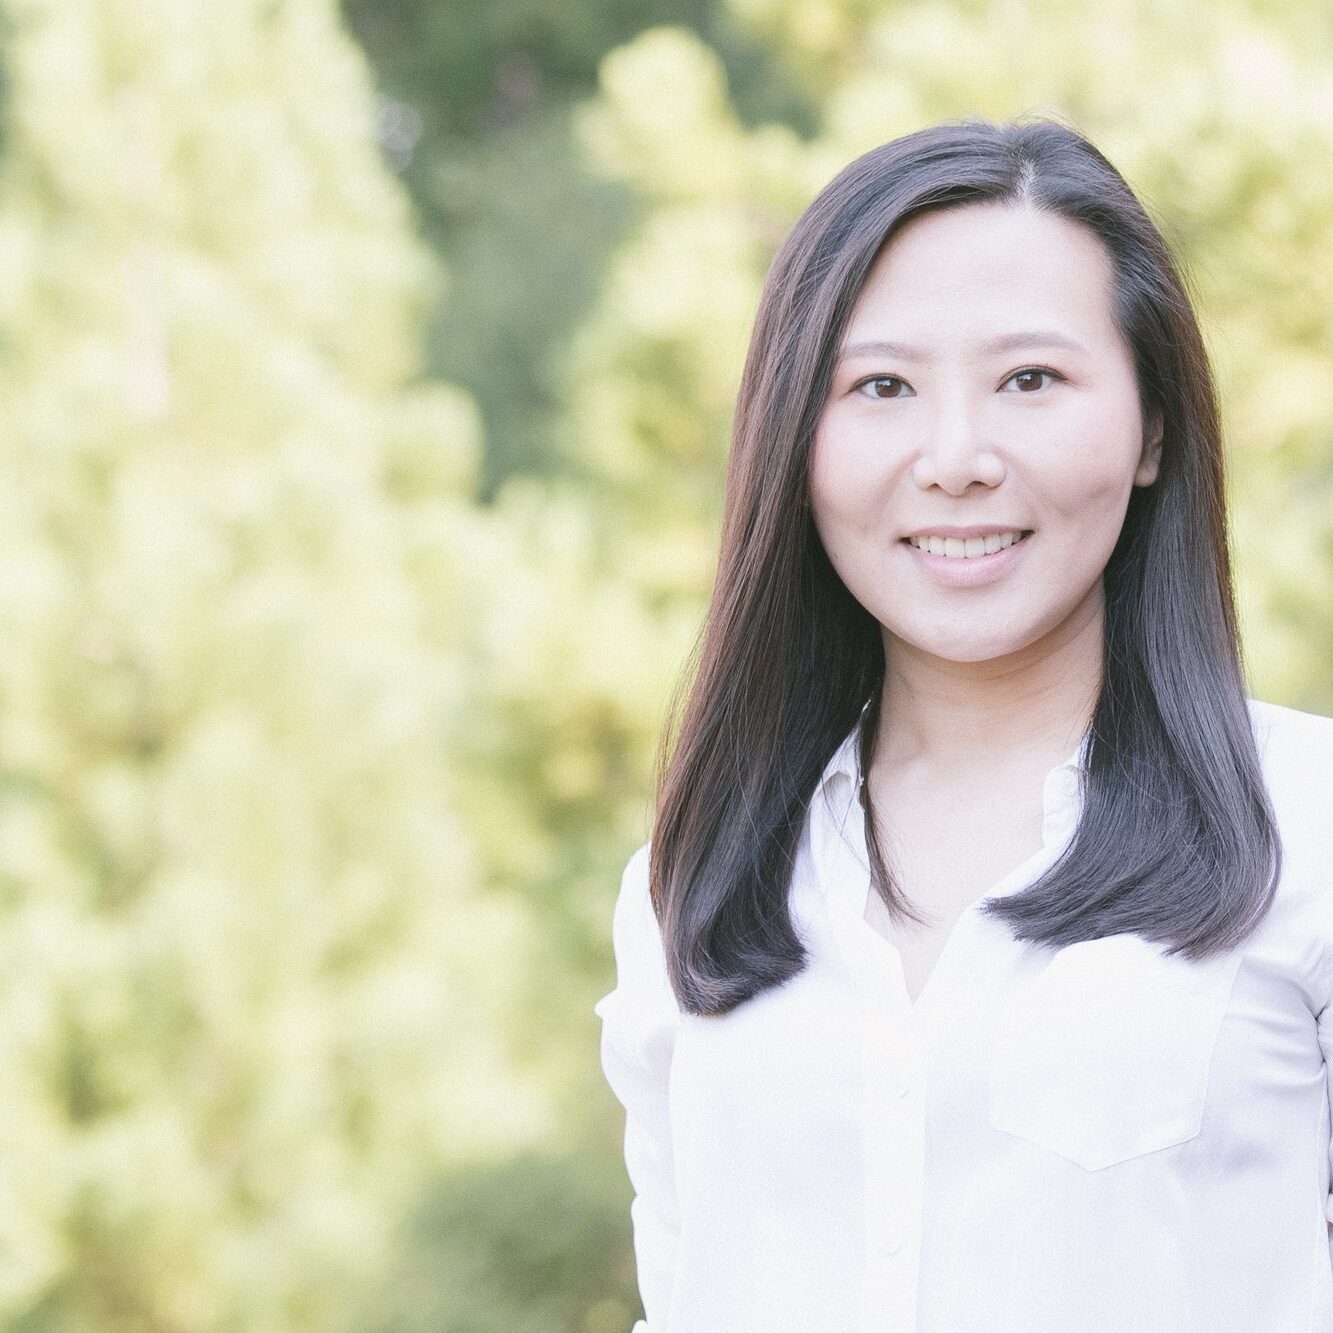 Smiling Chinese woman standing in front of out-of-focus trees